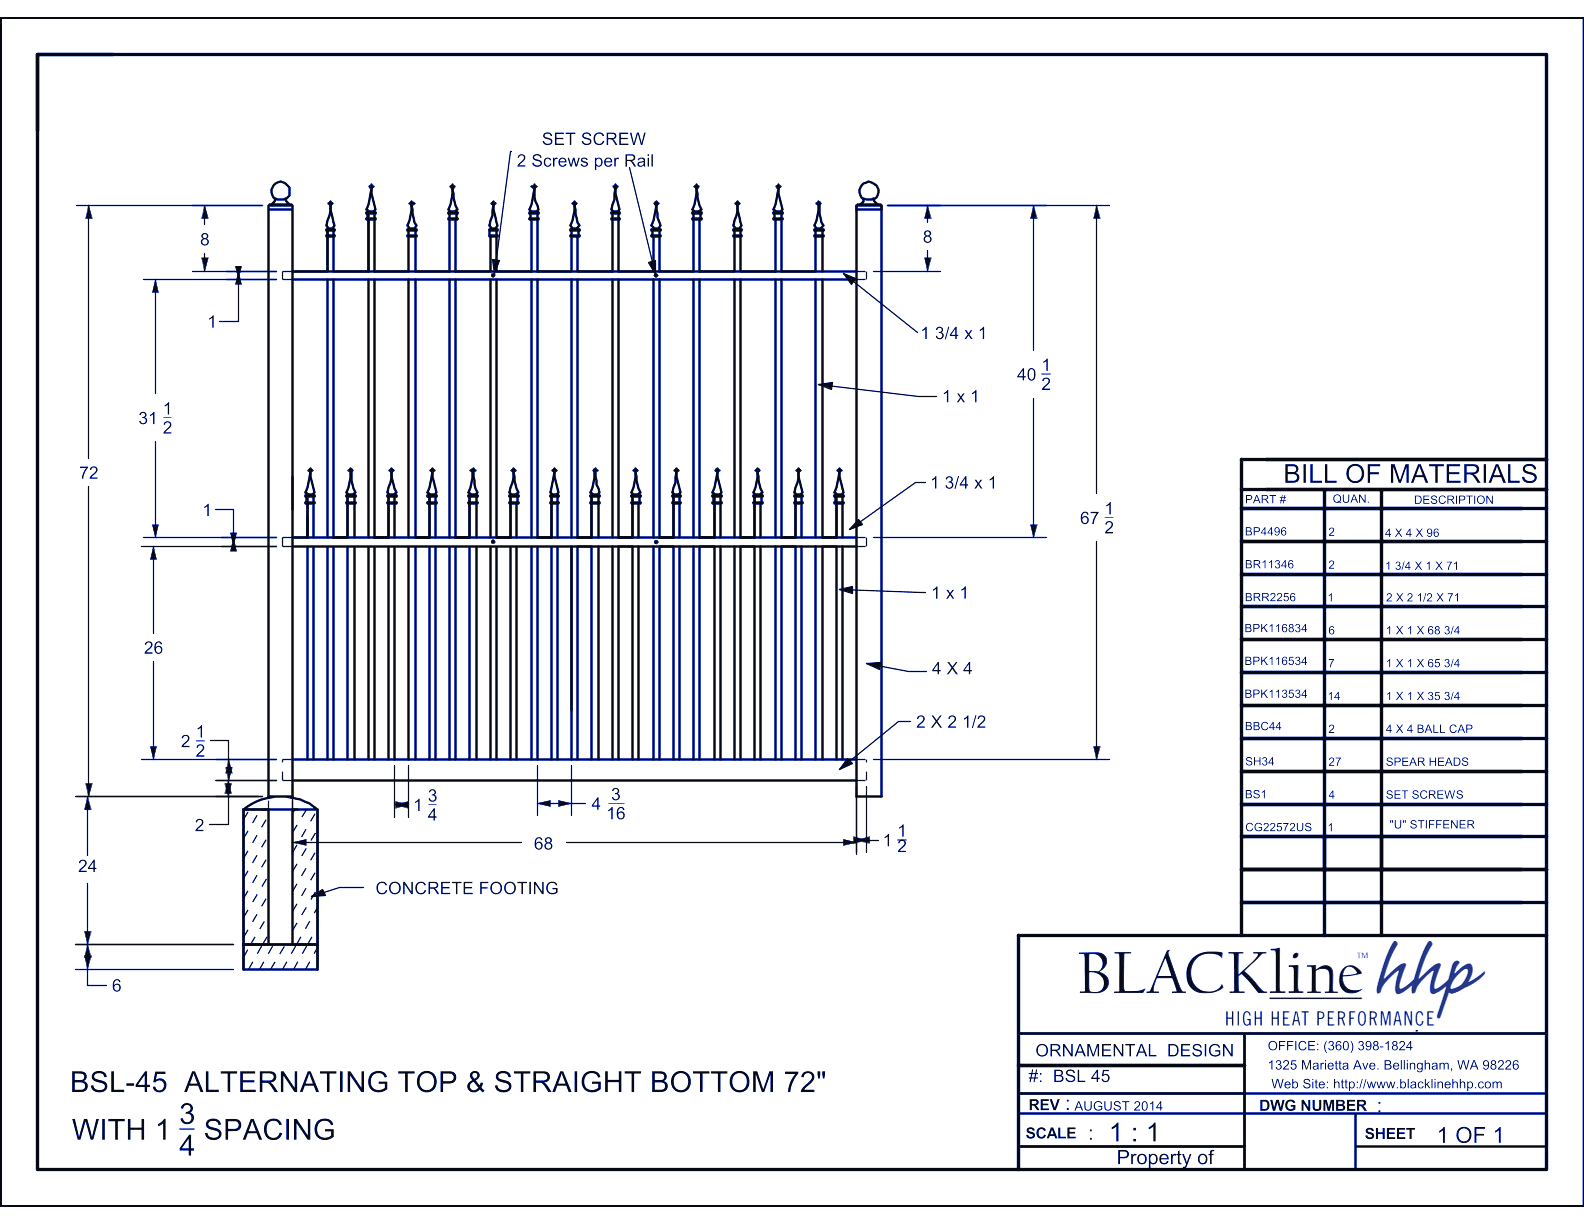 BSL-45: Alternating Top & Straight Bottom 72" with 1 3/4” Spacing